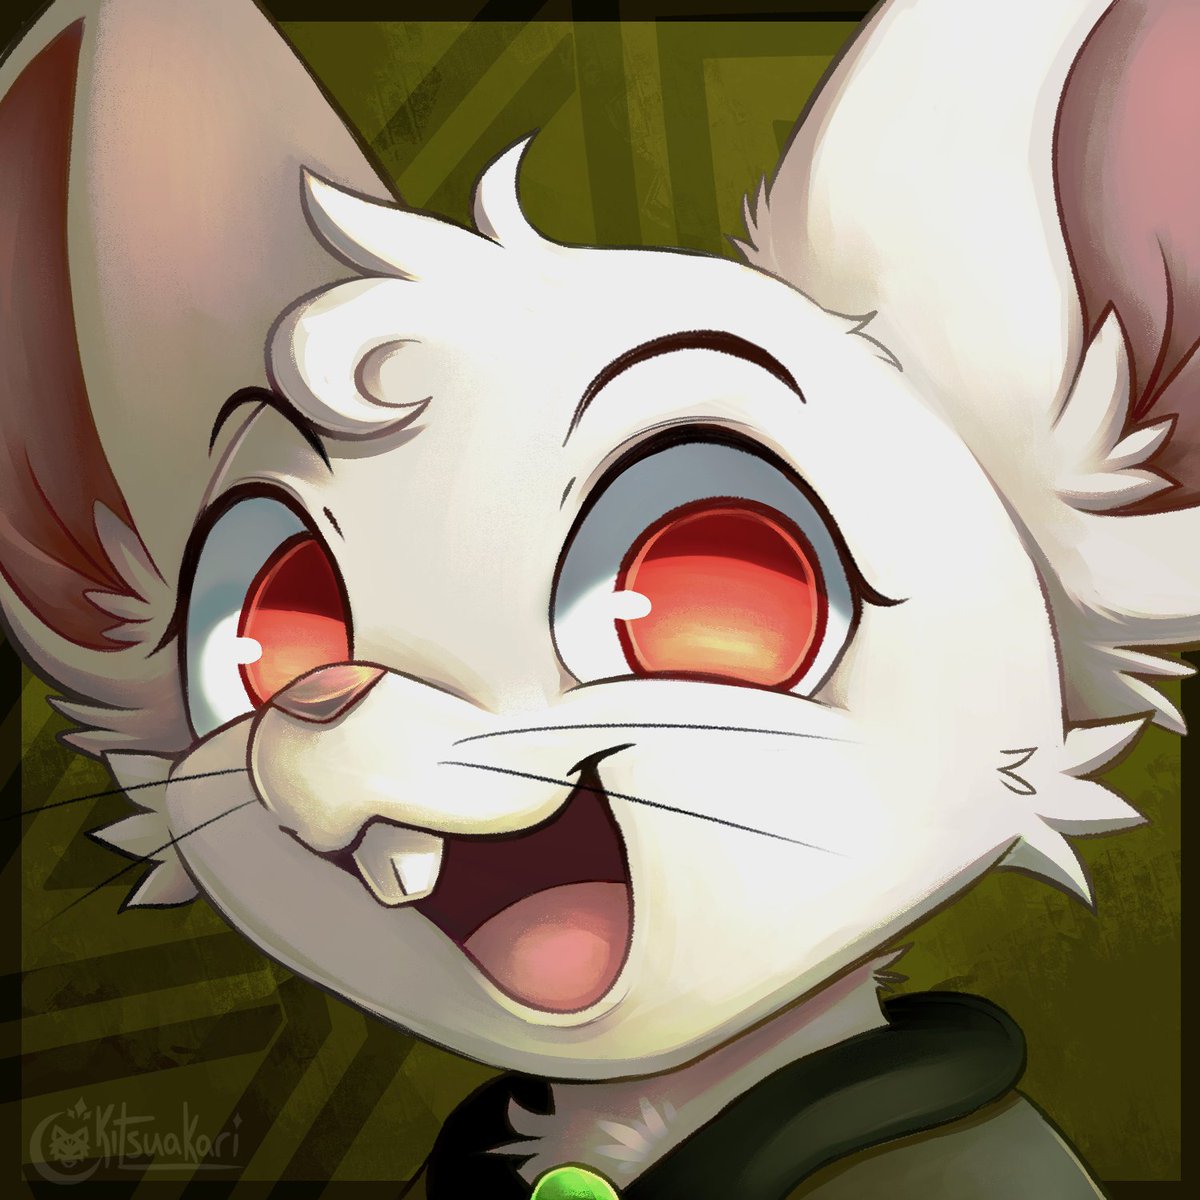 still so happy with this icon i did aaa!